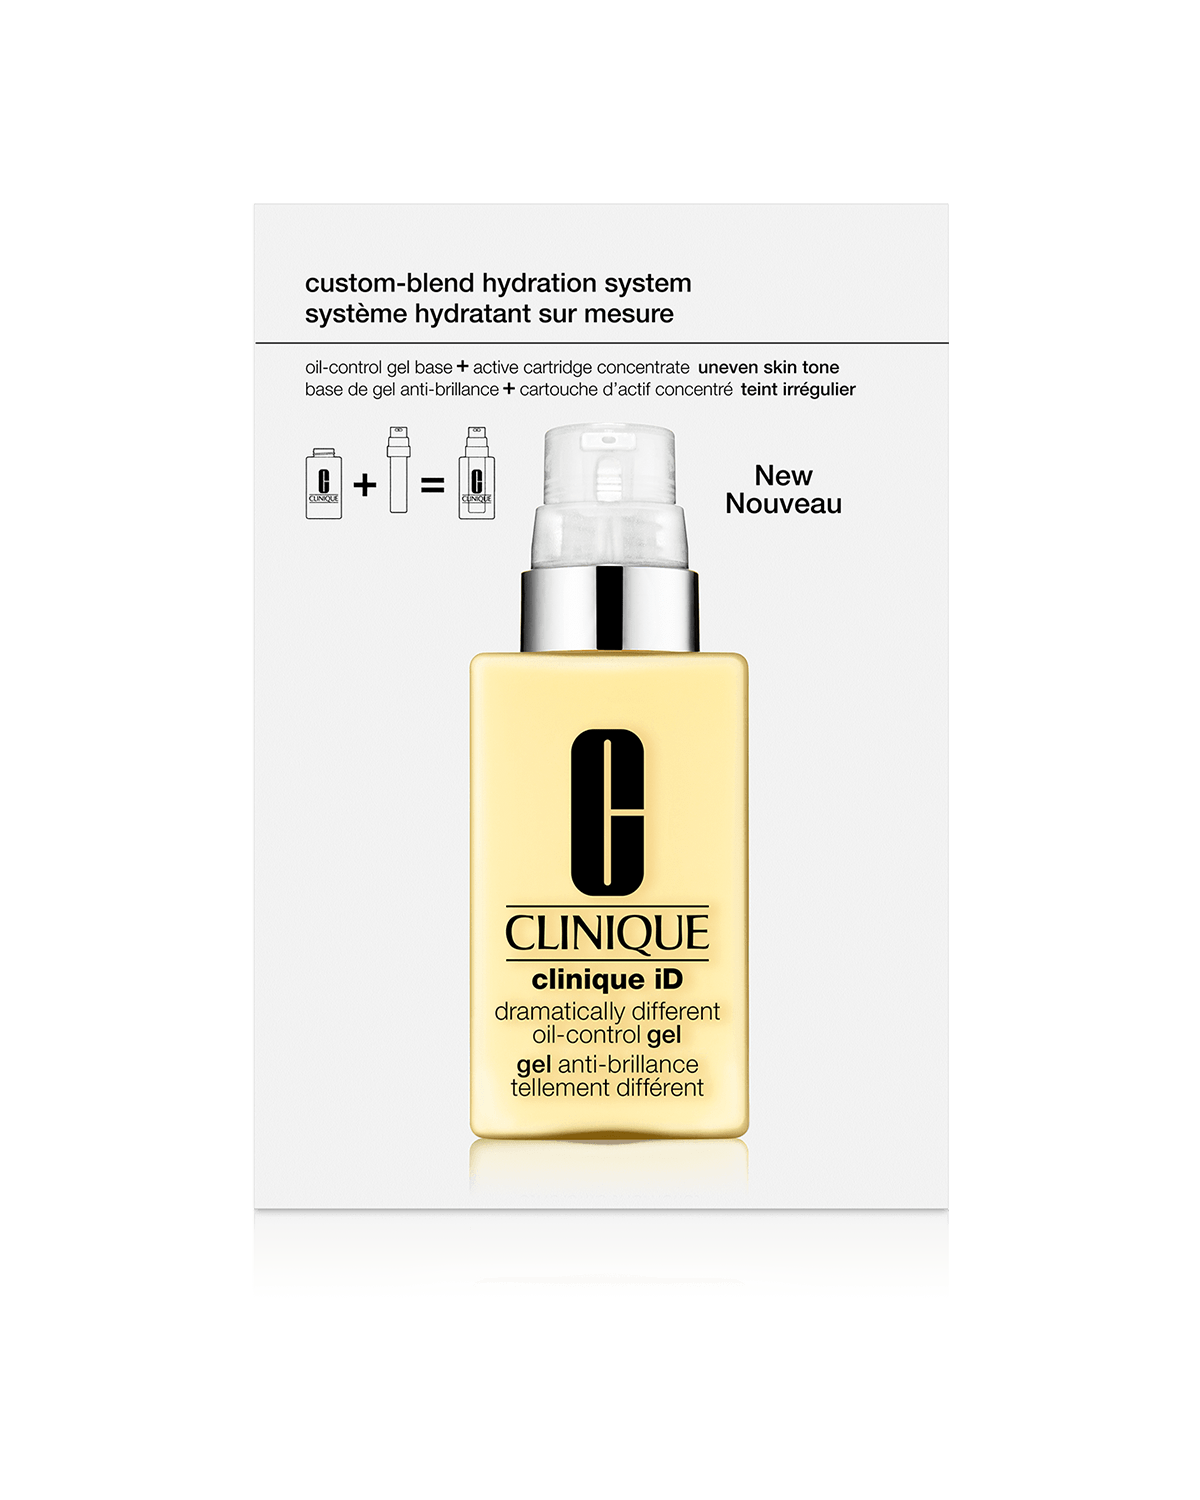 Clinique iD™: Dramatically Different™ Oil-Control Gel + Active Cartridge Concentrate for Uneven Skin Tone packette